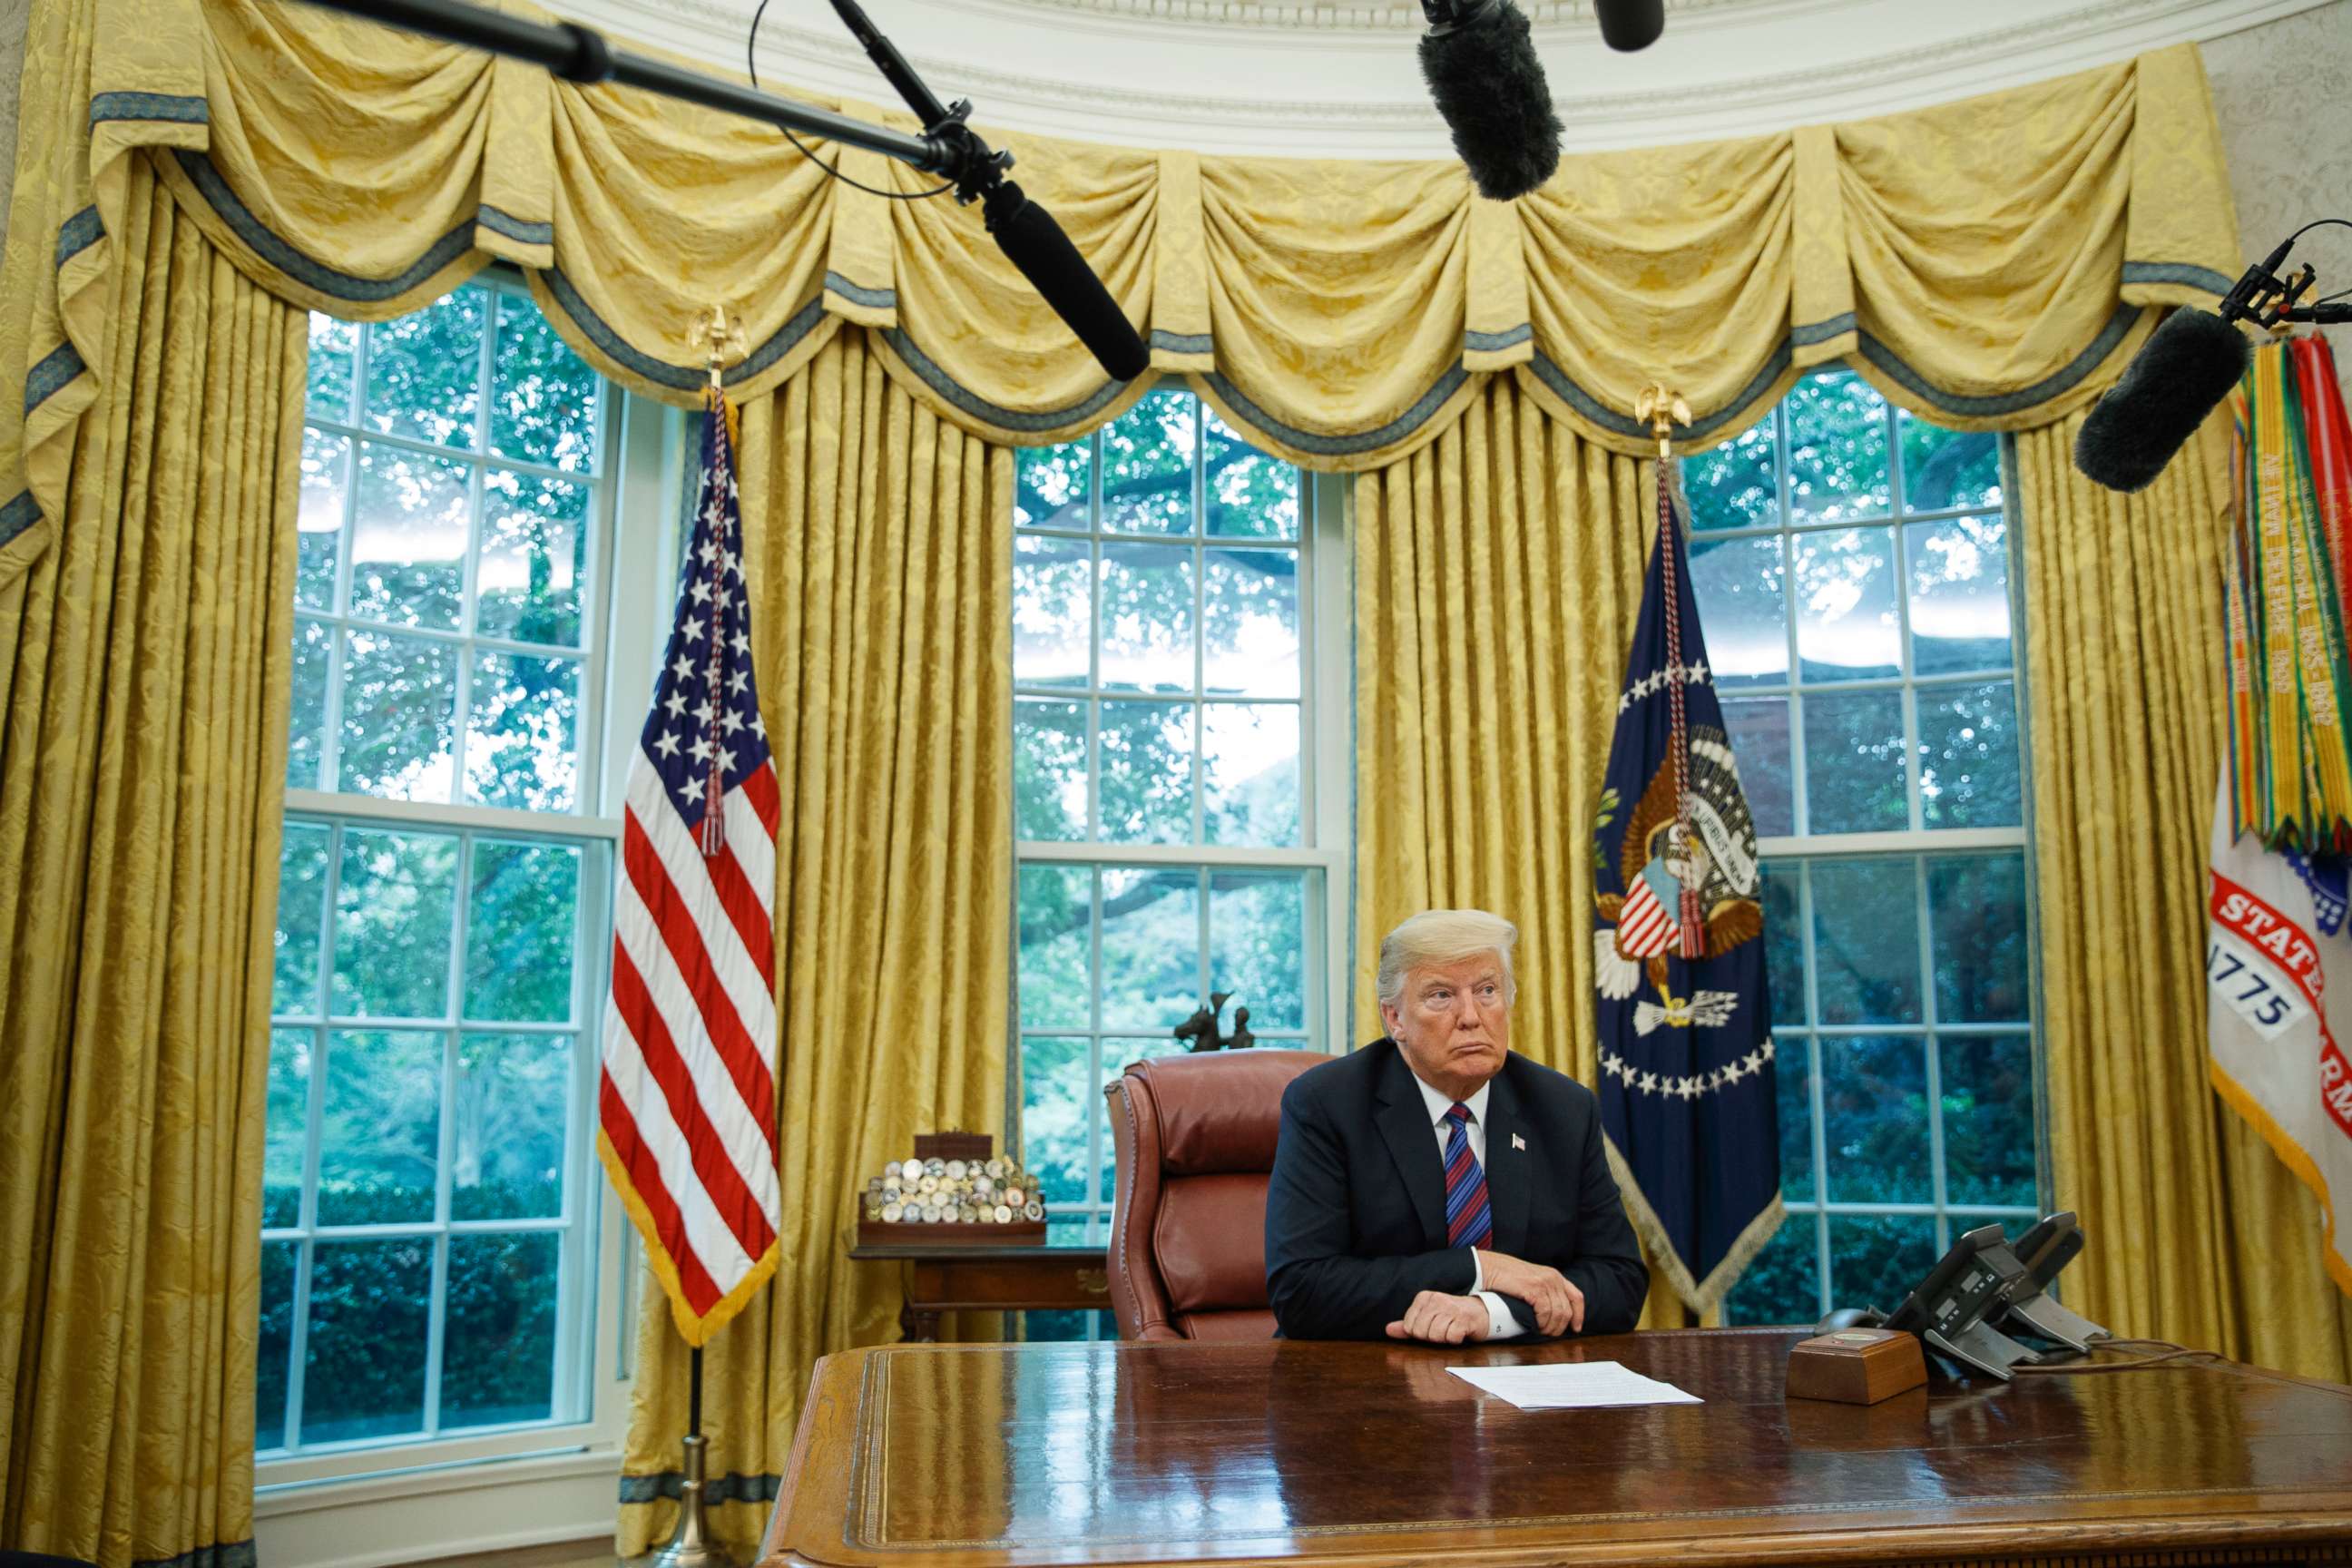 PHOTO: President Donald Trump listens during a phone call with Mexican President Enrique Pena Nieto about a trade agreement between the US and Mexico, in the Oval Office of the White House, Aug. 27, 2018.